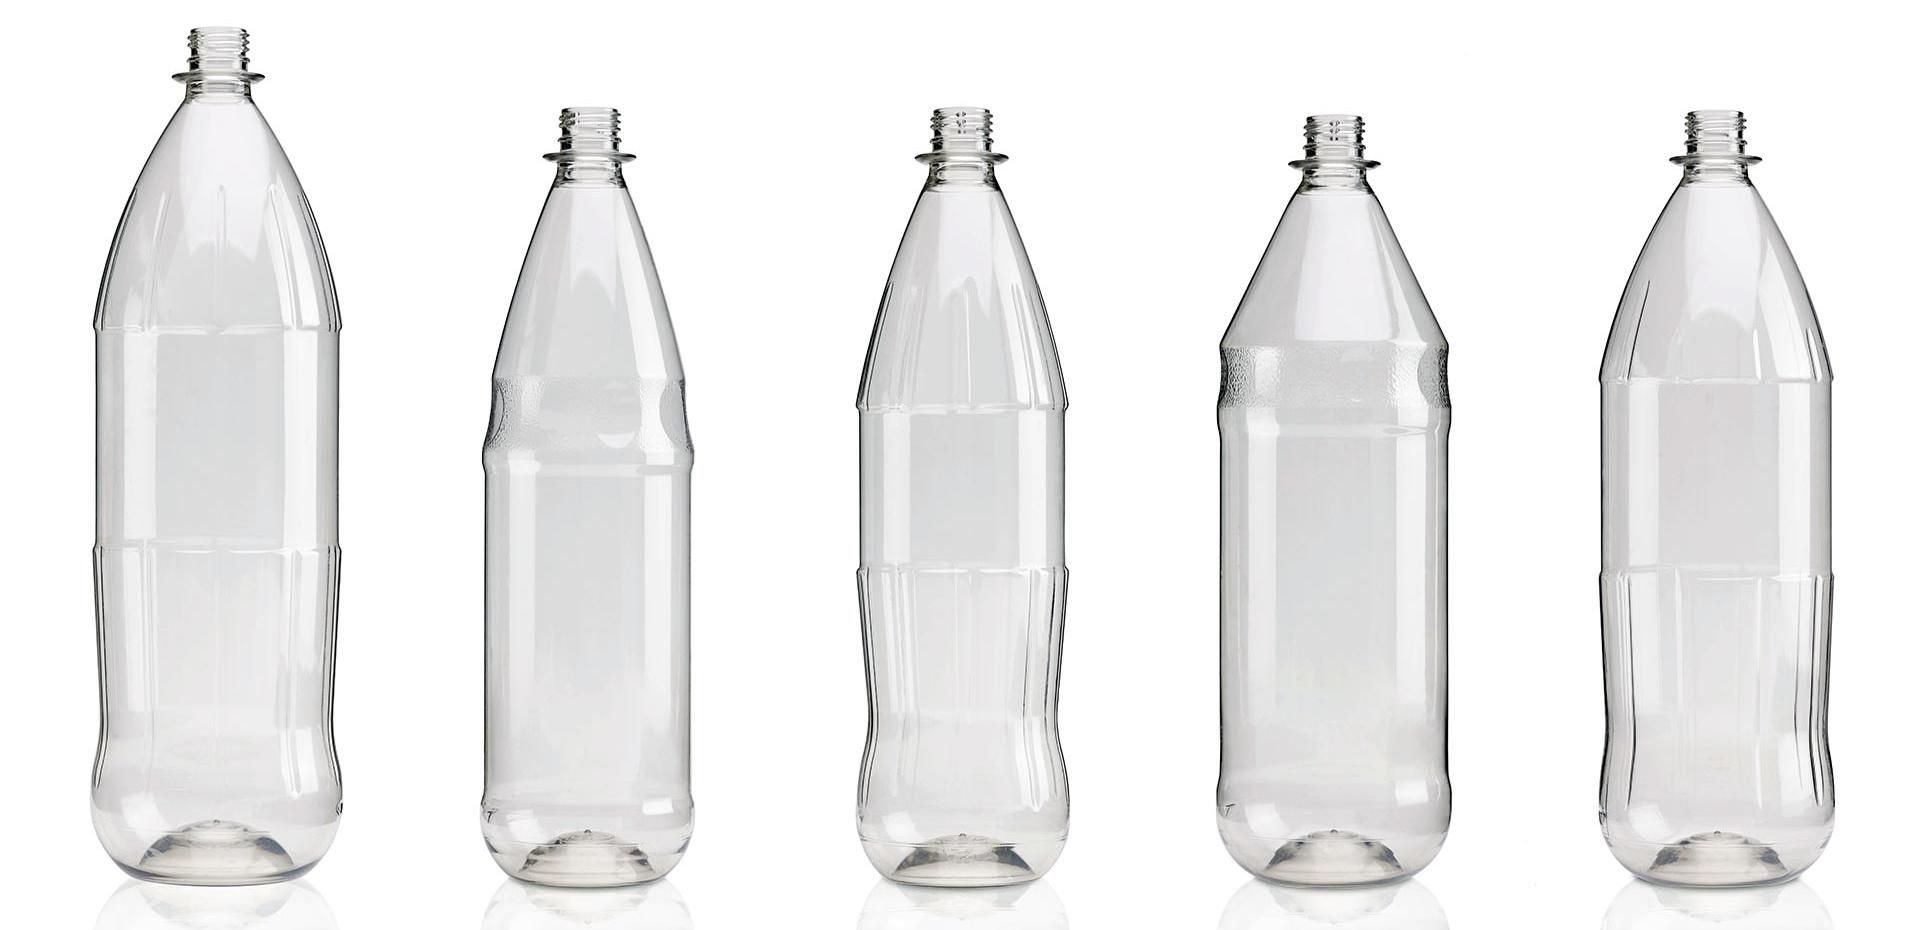 A New Alternative To Single Use Plastic Water Bottles